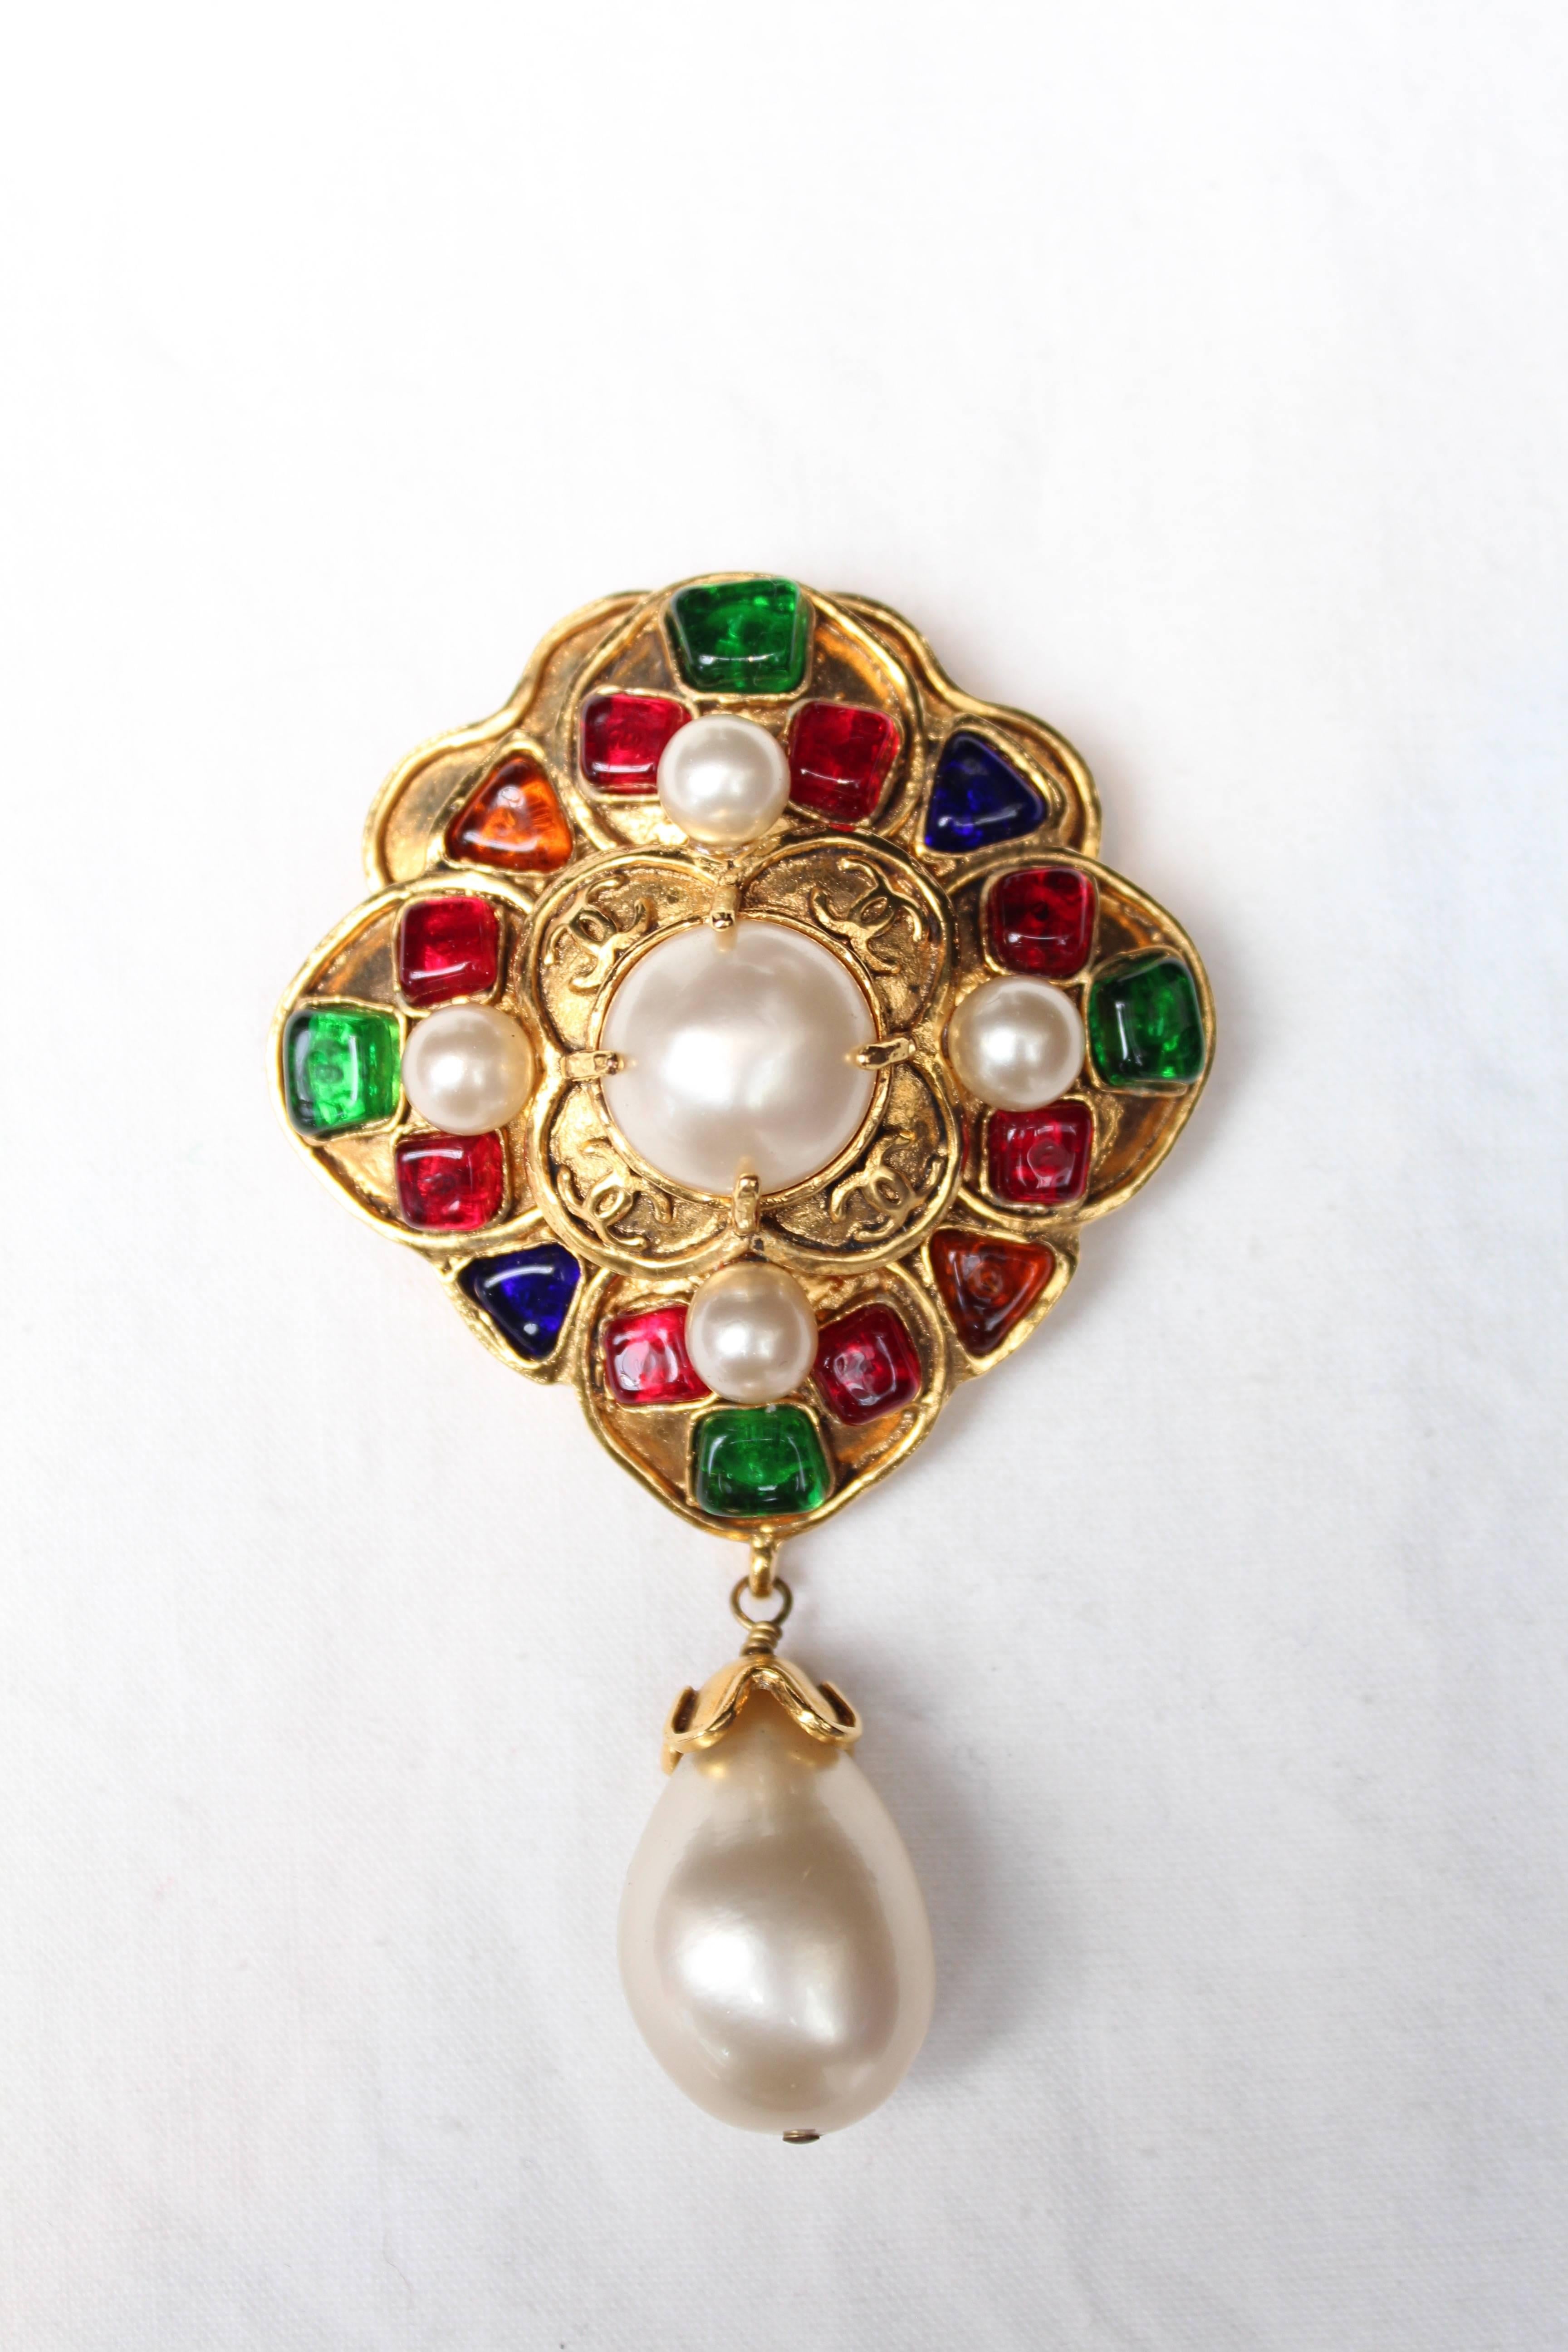 CHANEL (Made in France) Beautiful hammered gilded metal brooch representing a stylized cross paved with ruby, sapphire and emerald glass paste cabochons. A pearly cabochons decorates the center of the brooch. A pearly teardrop topped with a gilded